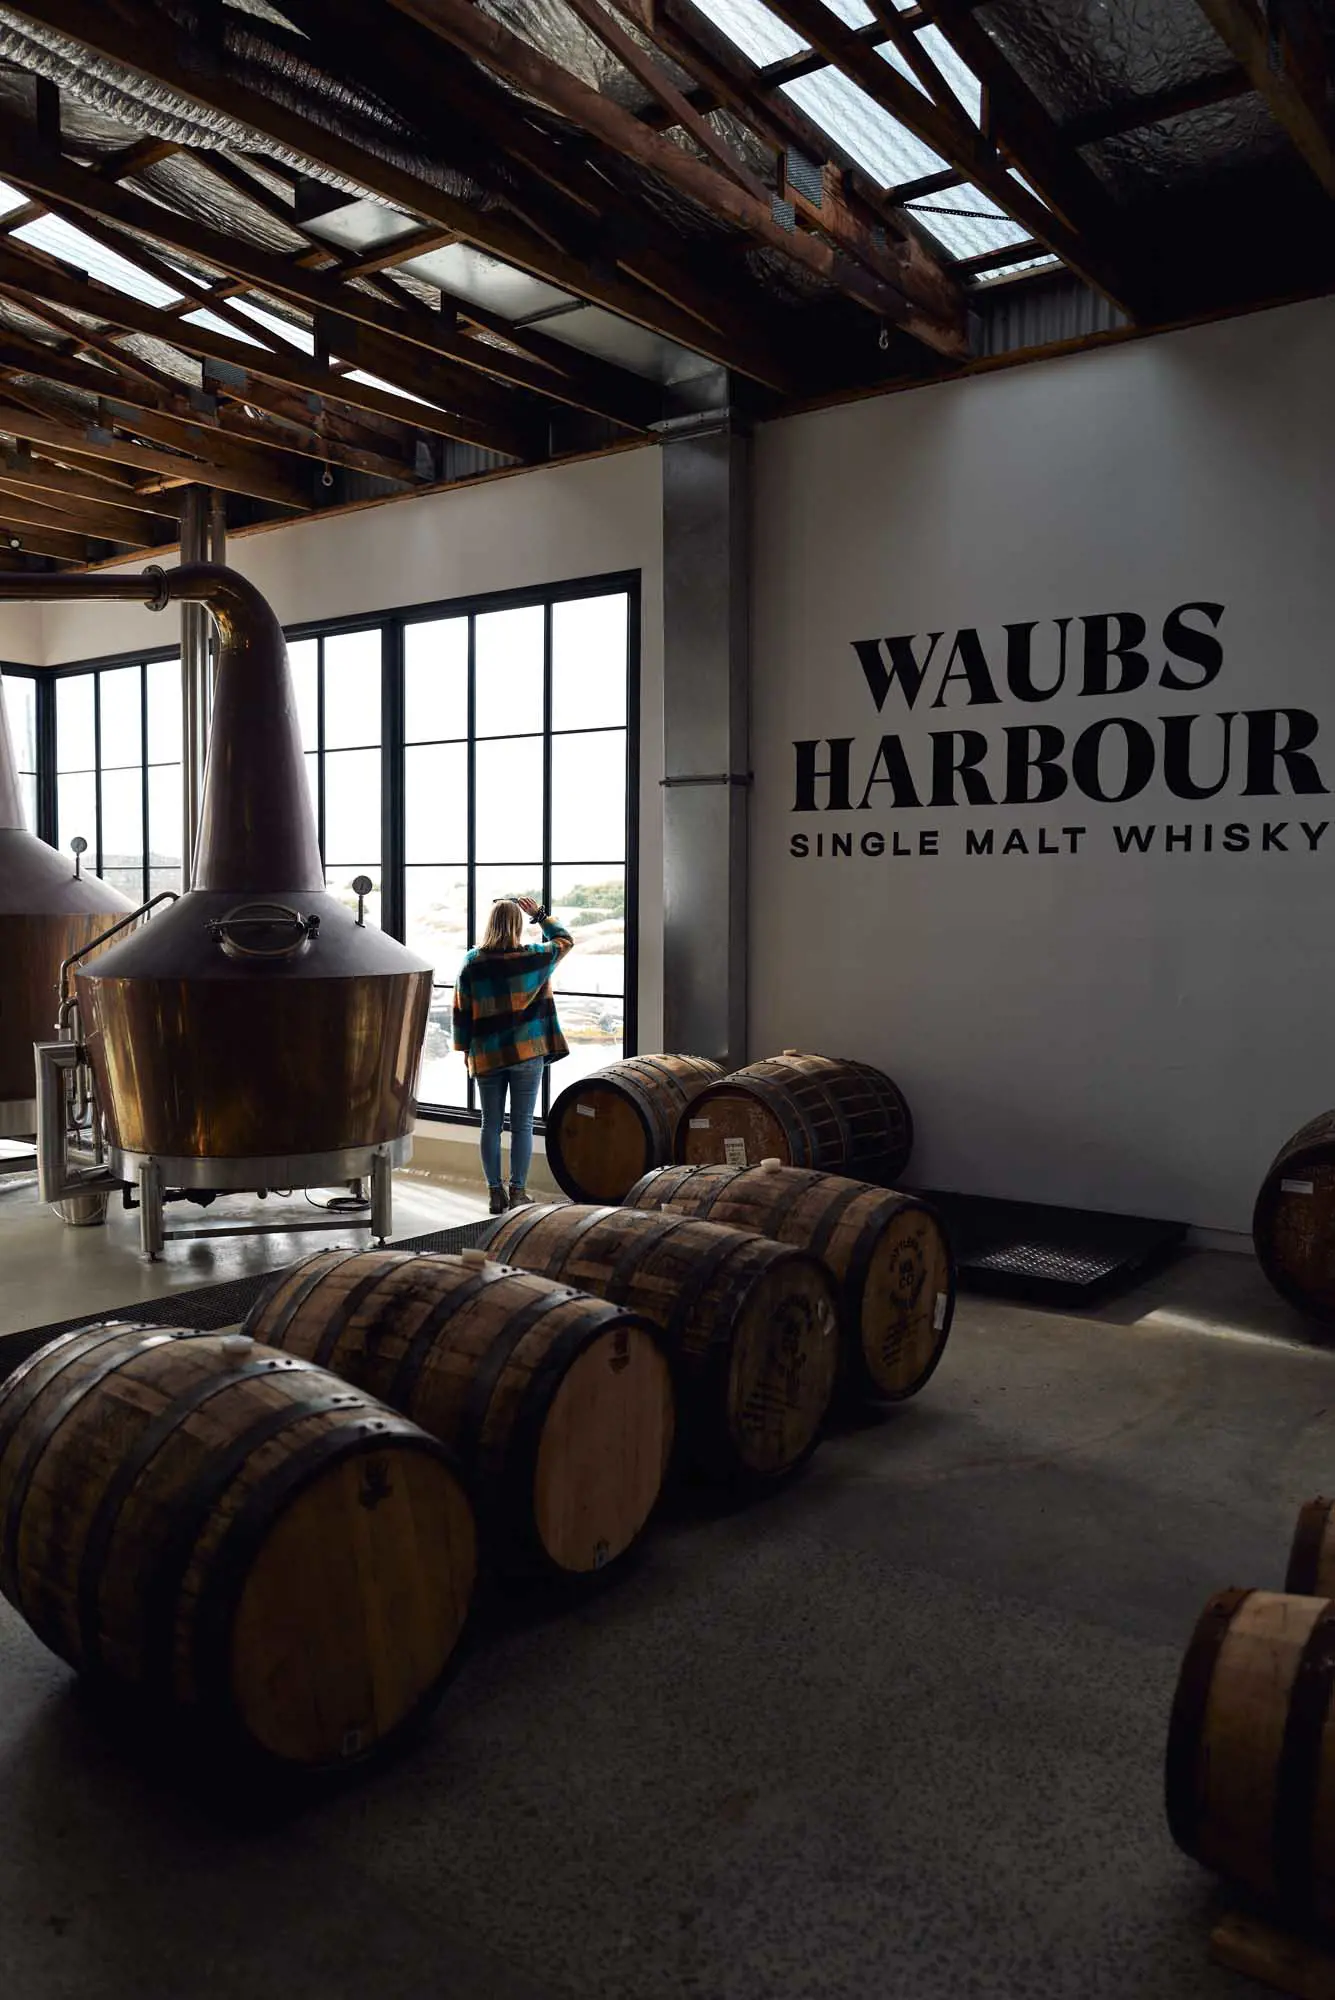 A high-ceiling industrial warehouse converted into a distillery with large copper stills and windows.